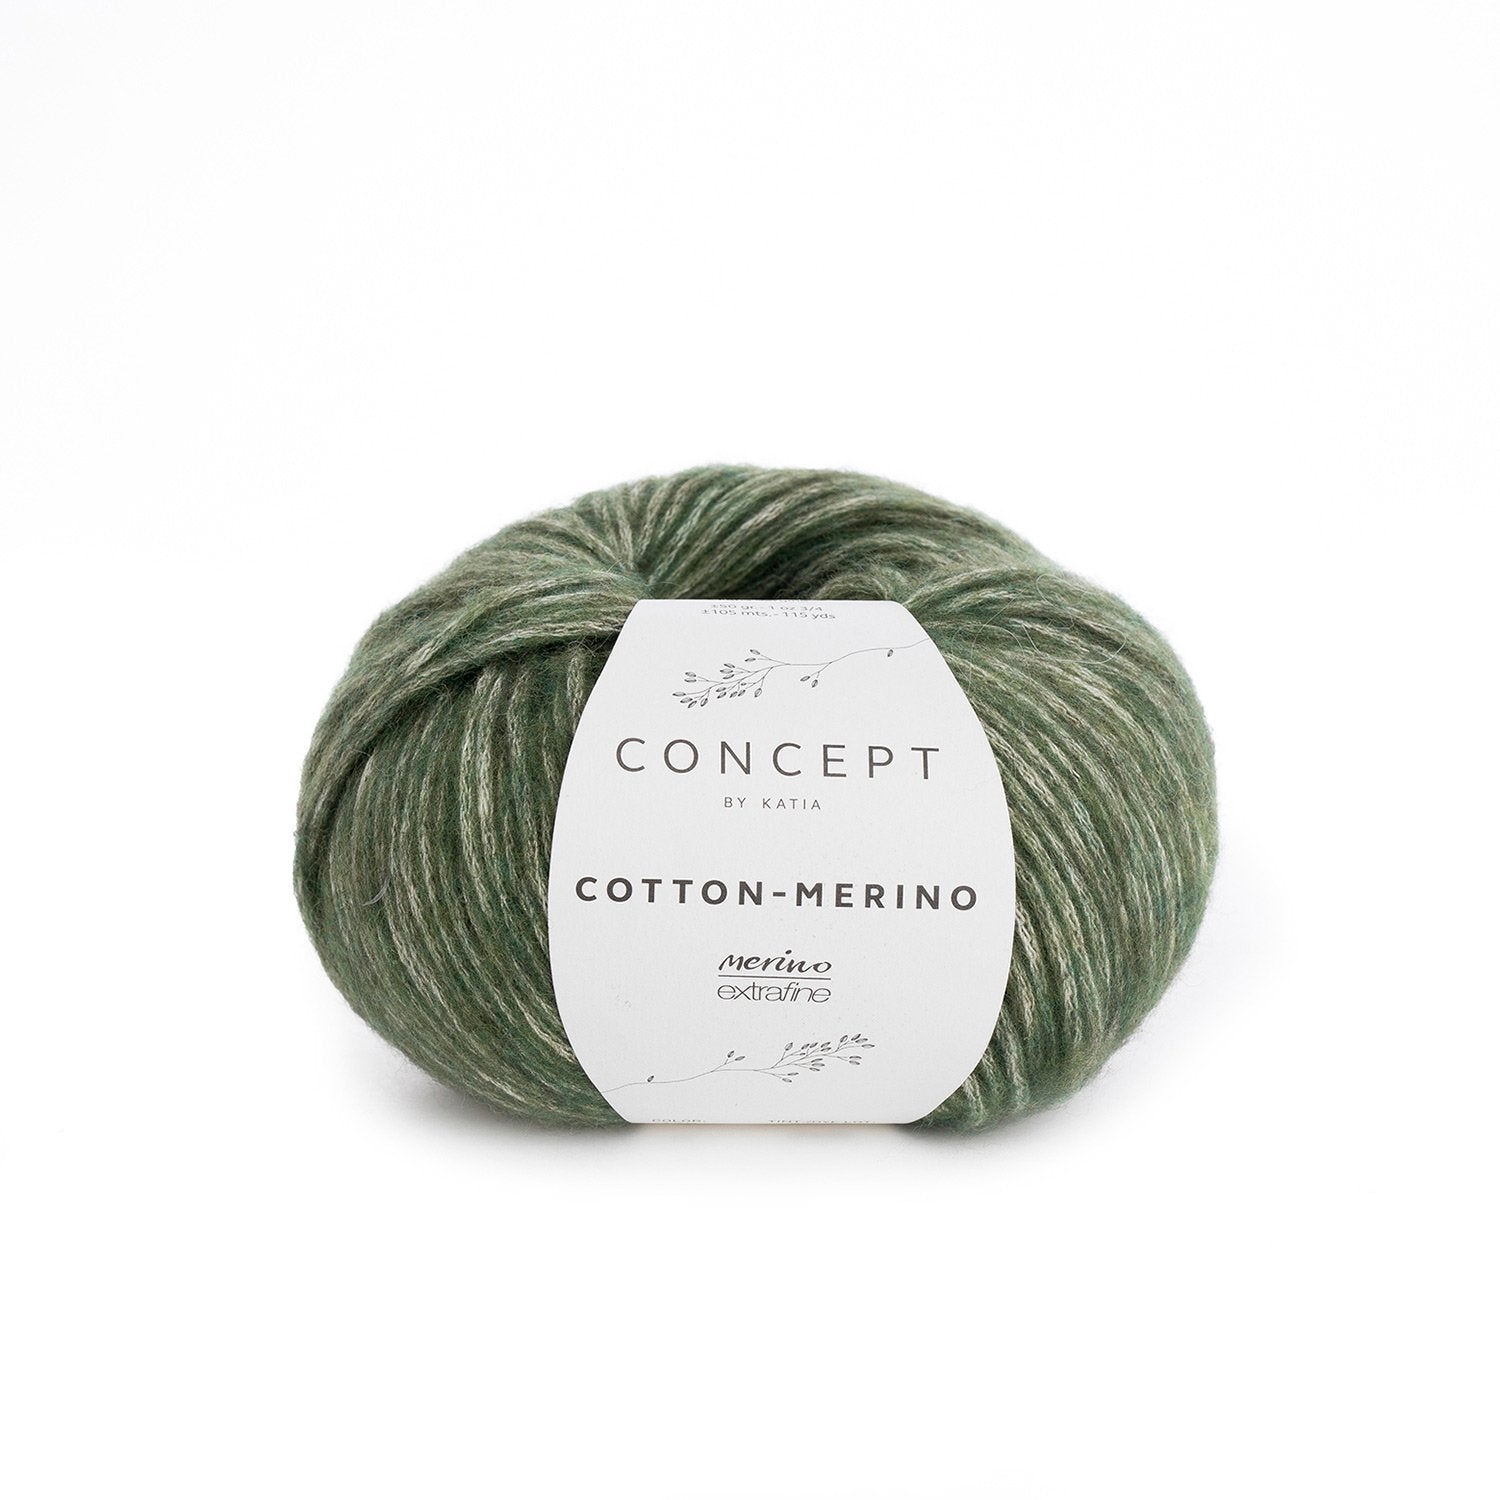 Concept by Katia Cotton-Merino - 122 Pale Green - 10 Ply - Concept by Katia - The Little Yarn Store